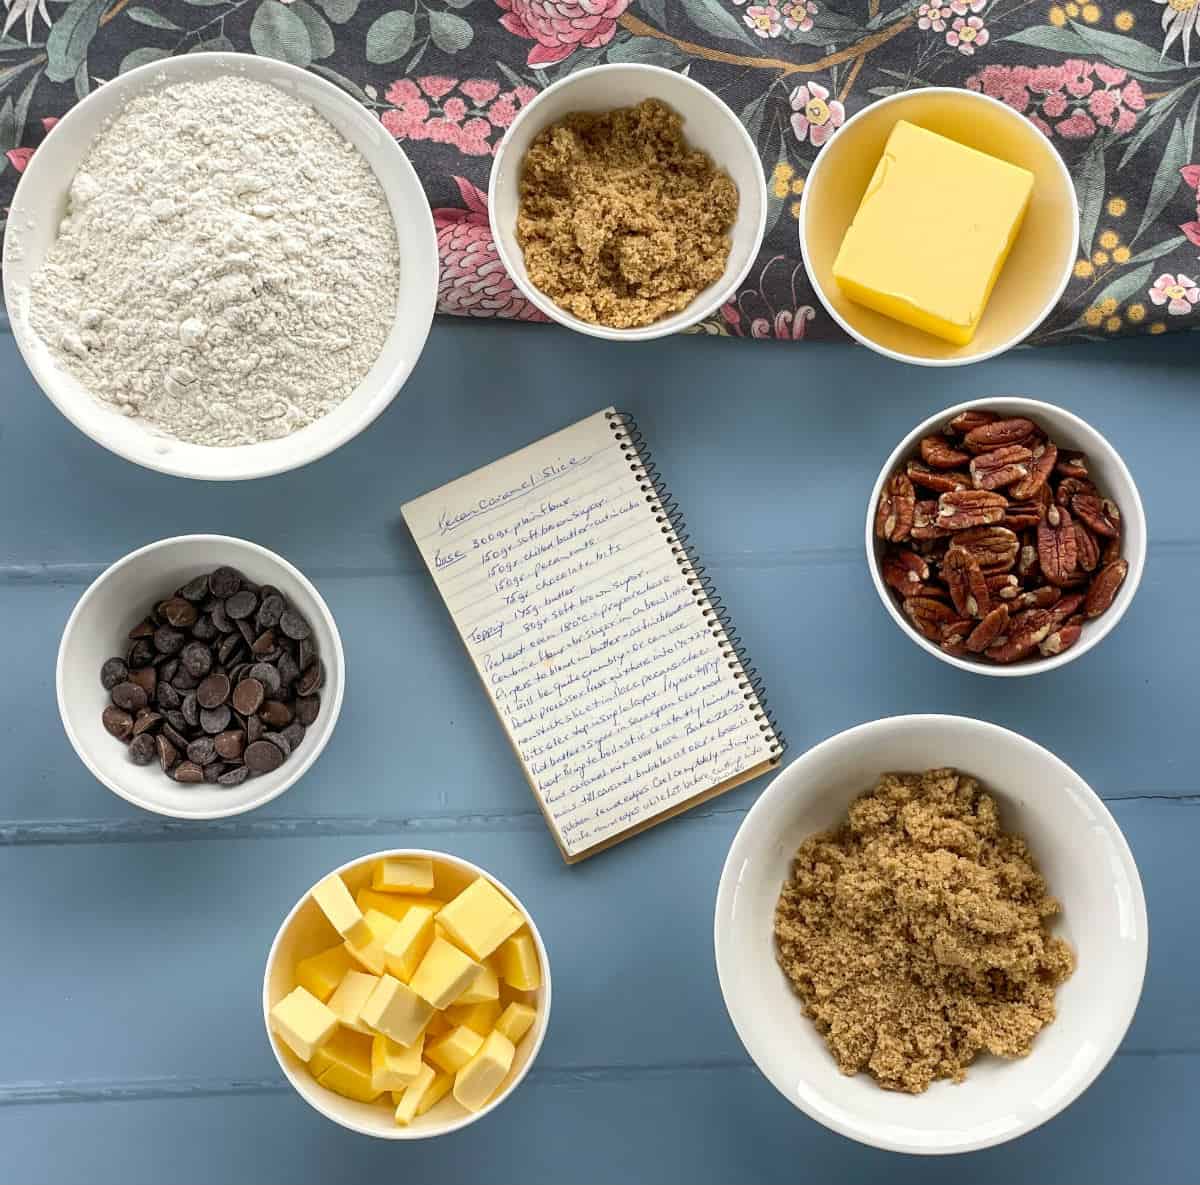 Ingredients used for Pecan Caramel Slice and handwritten recipe